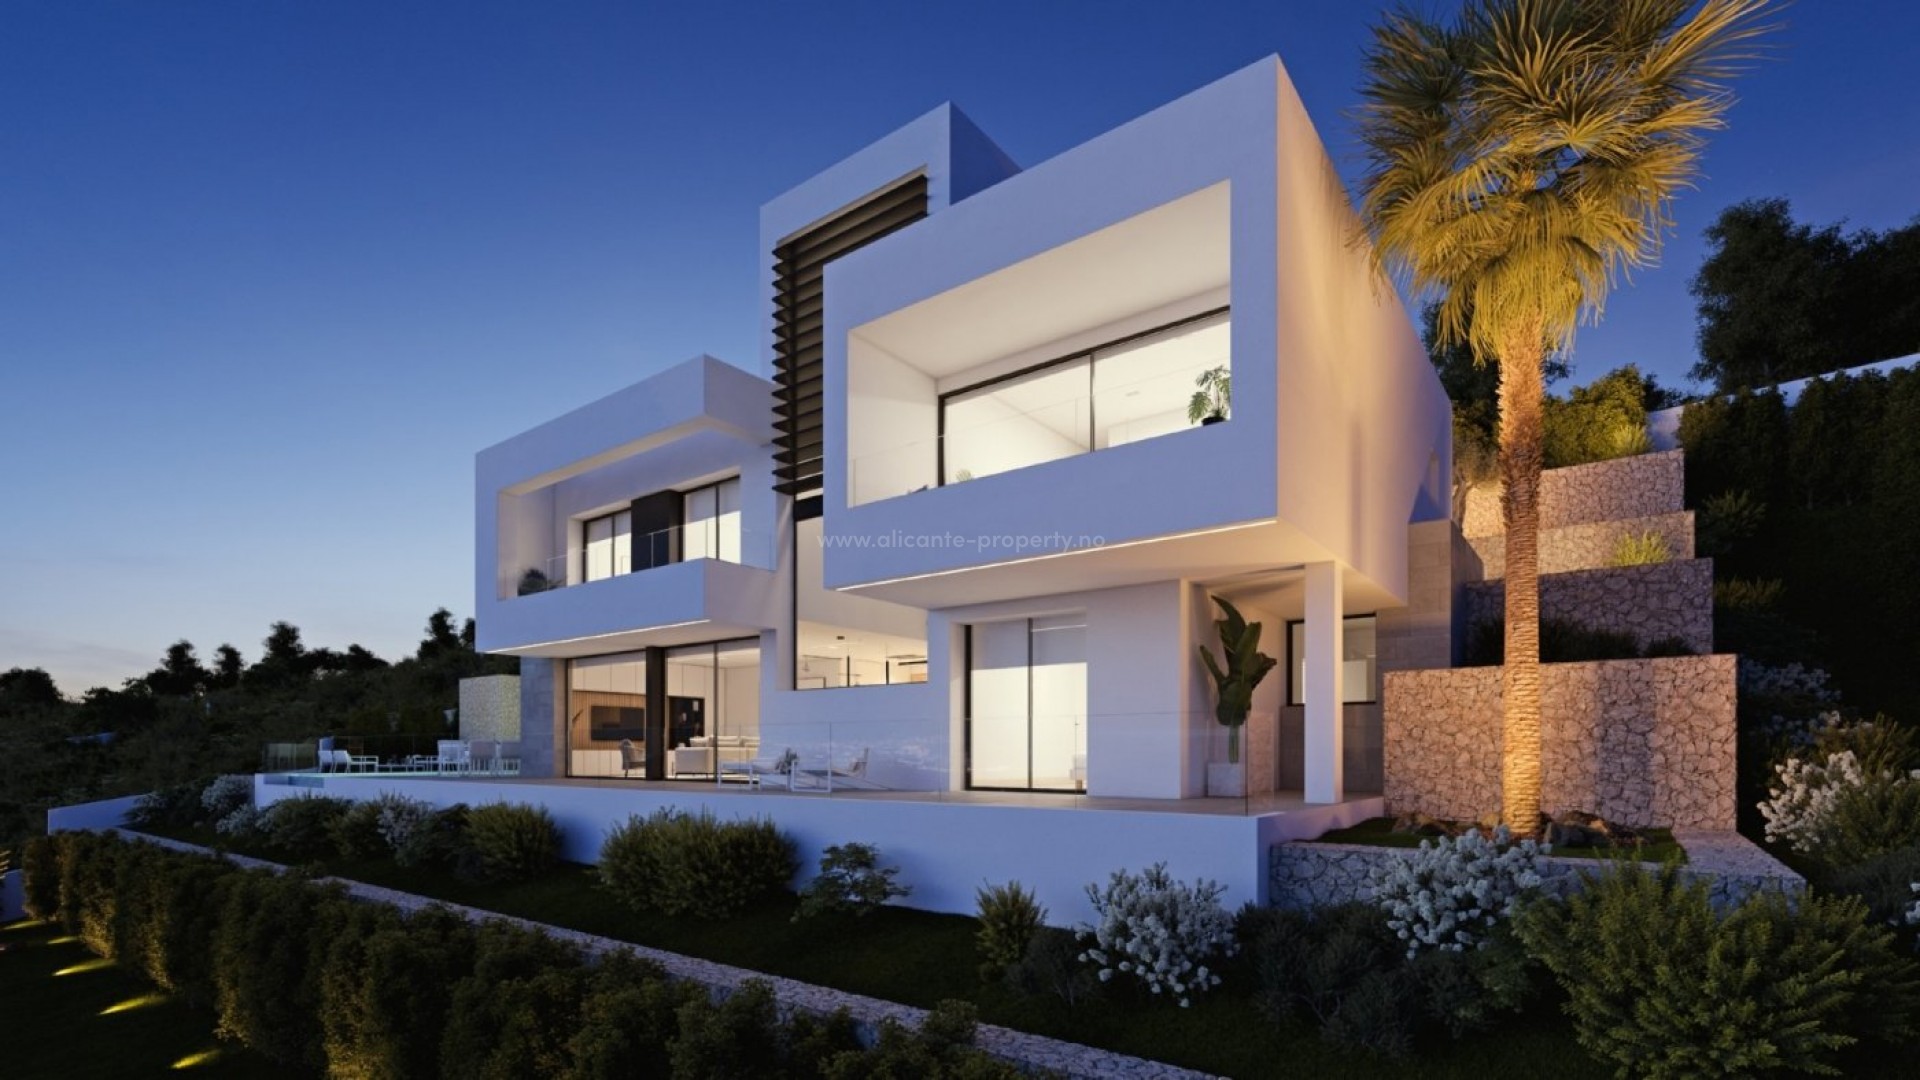 Luxury villa in Altea, 360° views of the sea and Benidorm, 4 bedrooms, 6 bathrooms, large terrace with swimming pool, the villa is automated